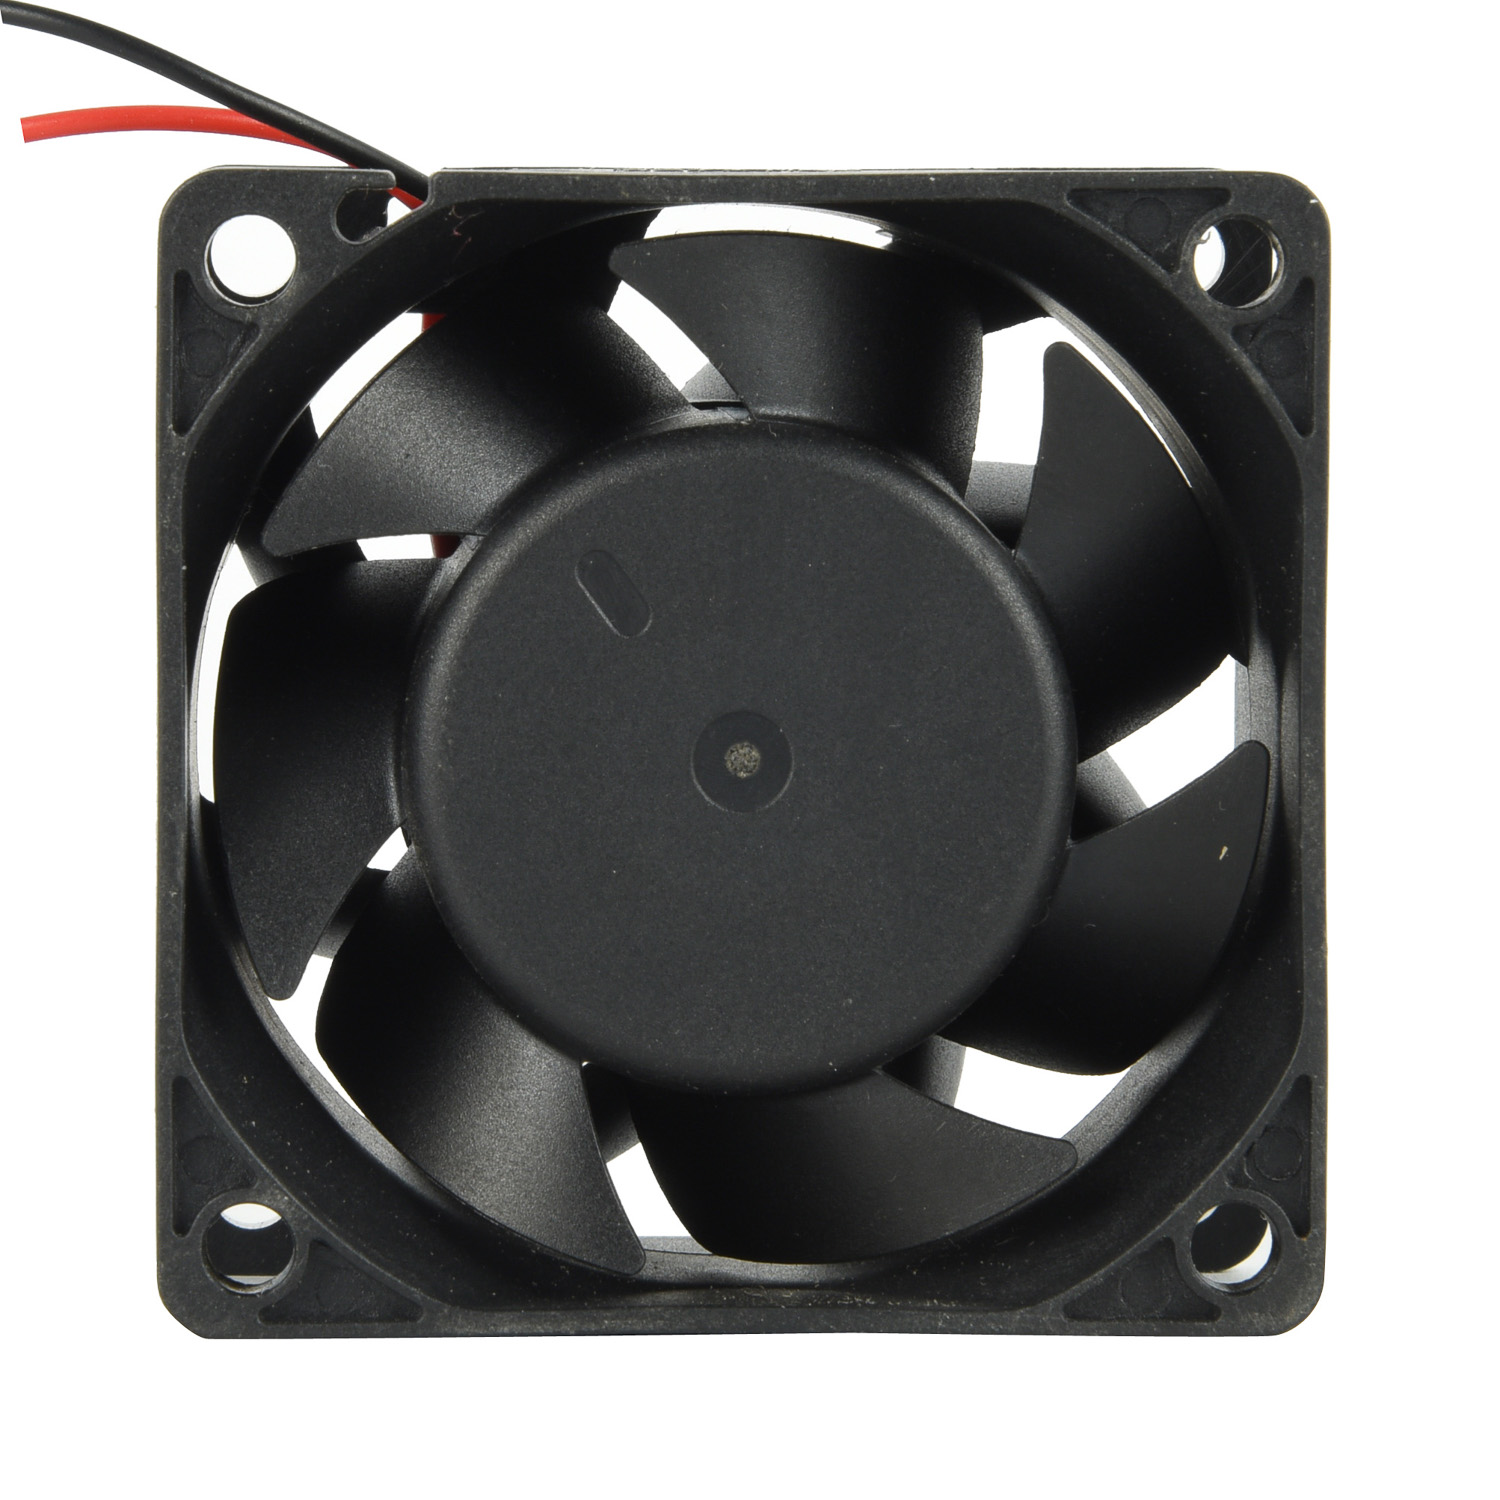  High-Performance EC 6038 Axial Cooling Fan with 60mm*60mm*38mm